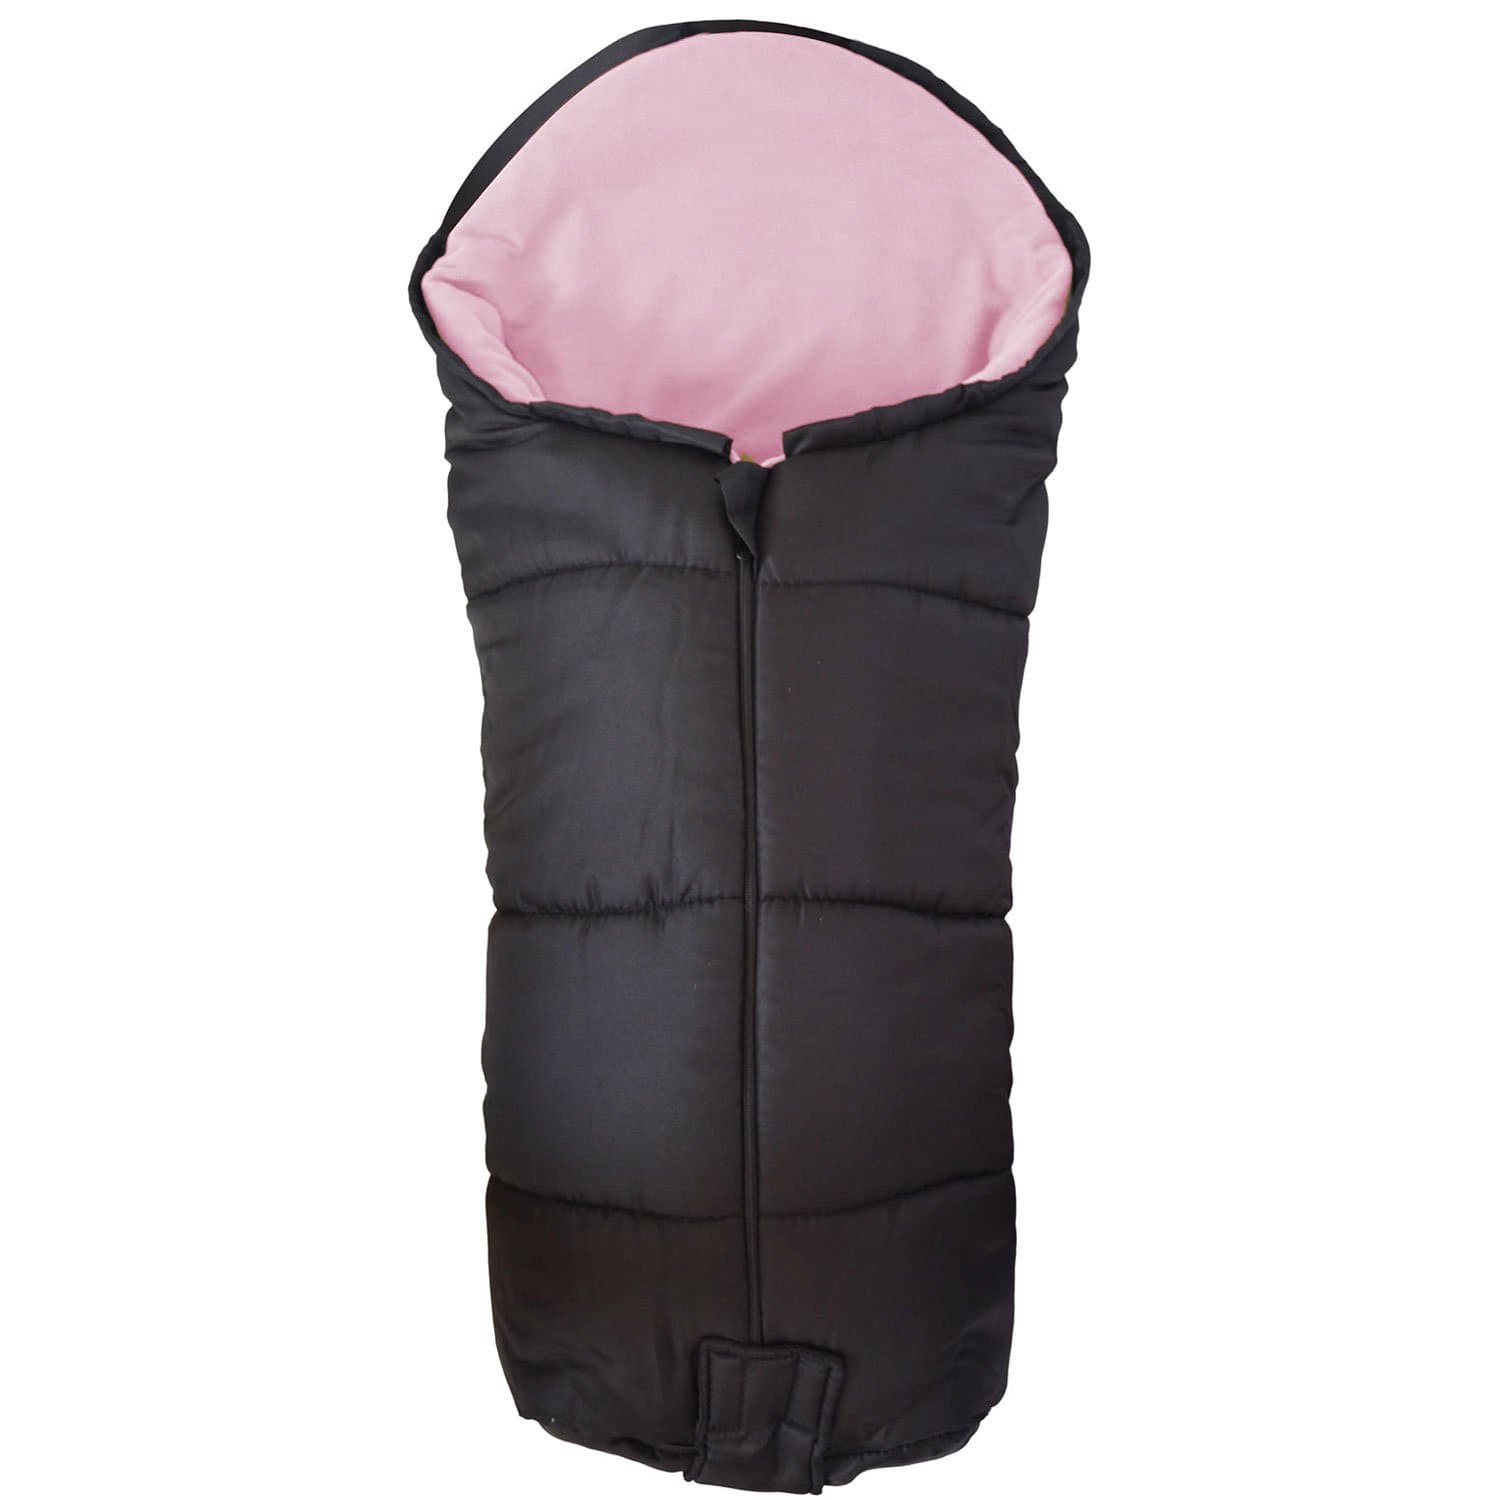 Deluxe Footmuff / Cosy Toes Compatible with Urban Detour - Light Pink / Fits All Models | For Your Little One